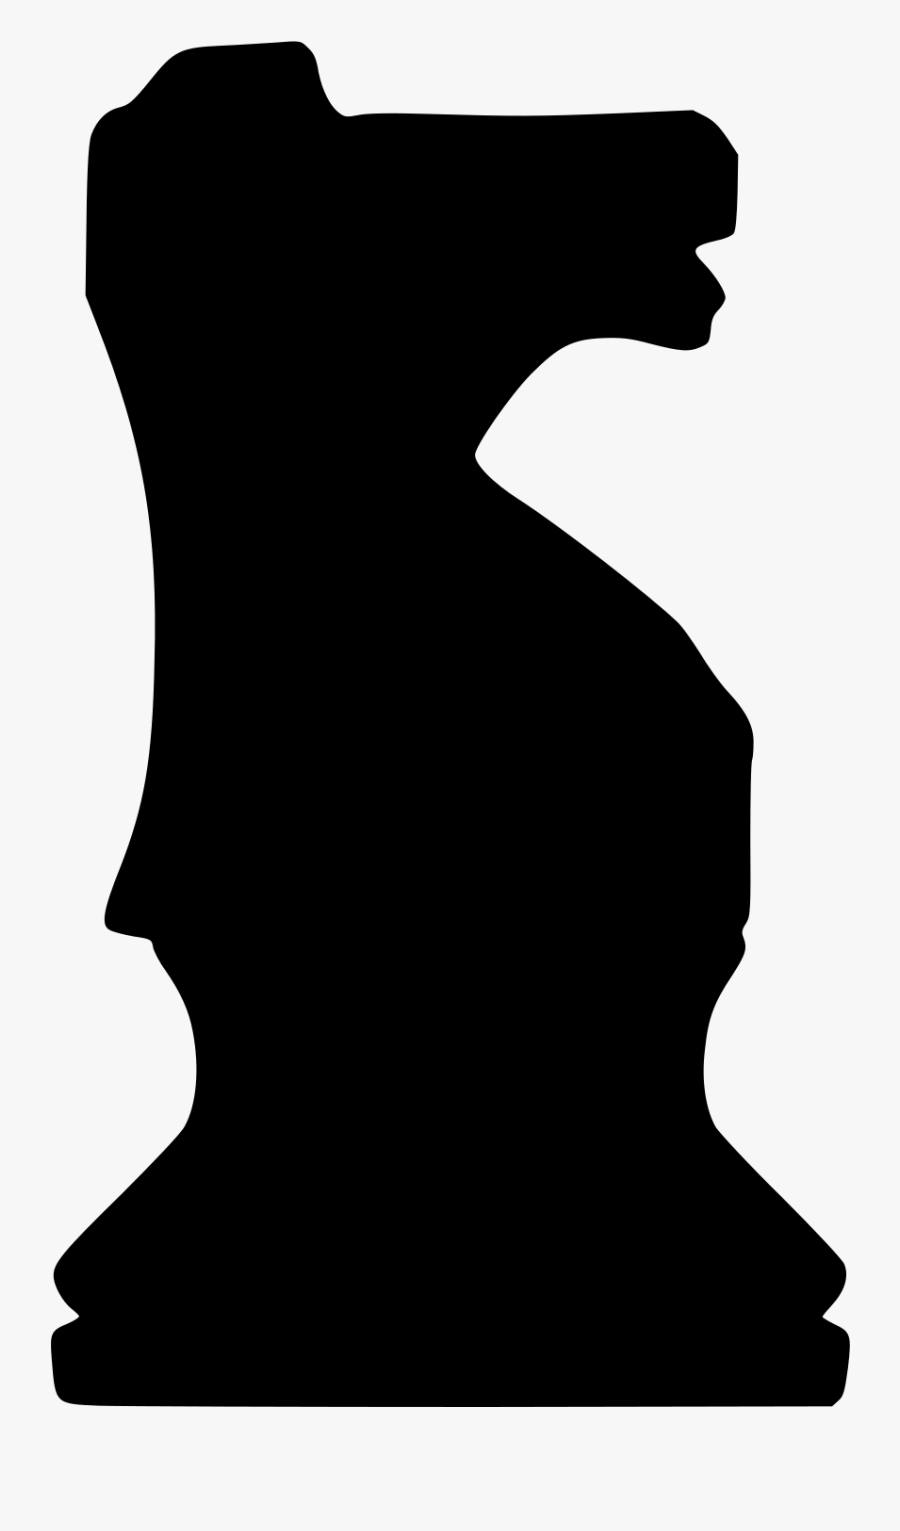 Chess Piece Silhouette Knight Queen - Knight Chess Piece Silhouette, Transparent Clipart